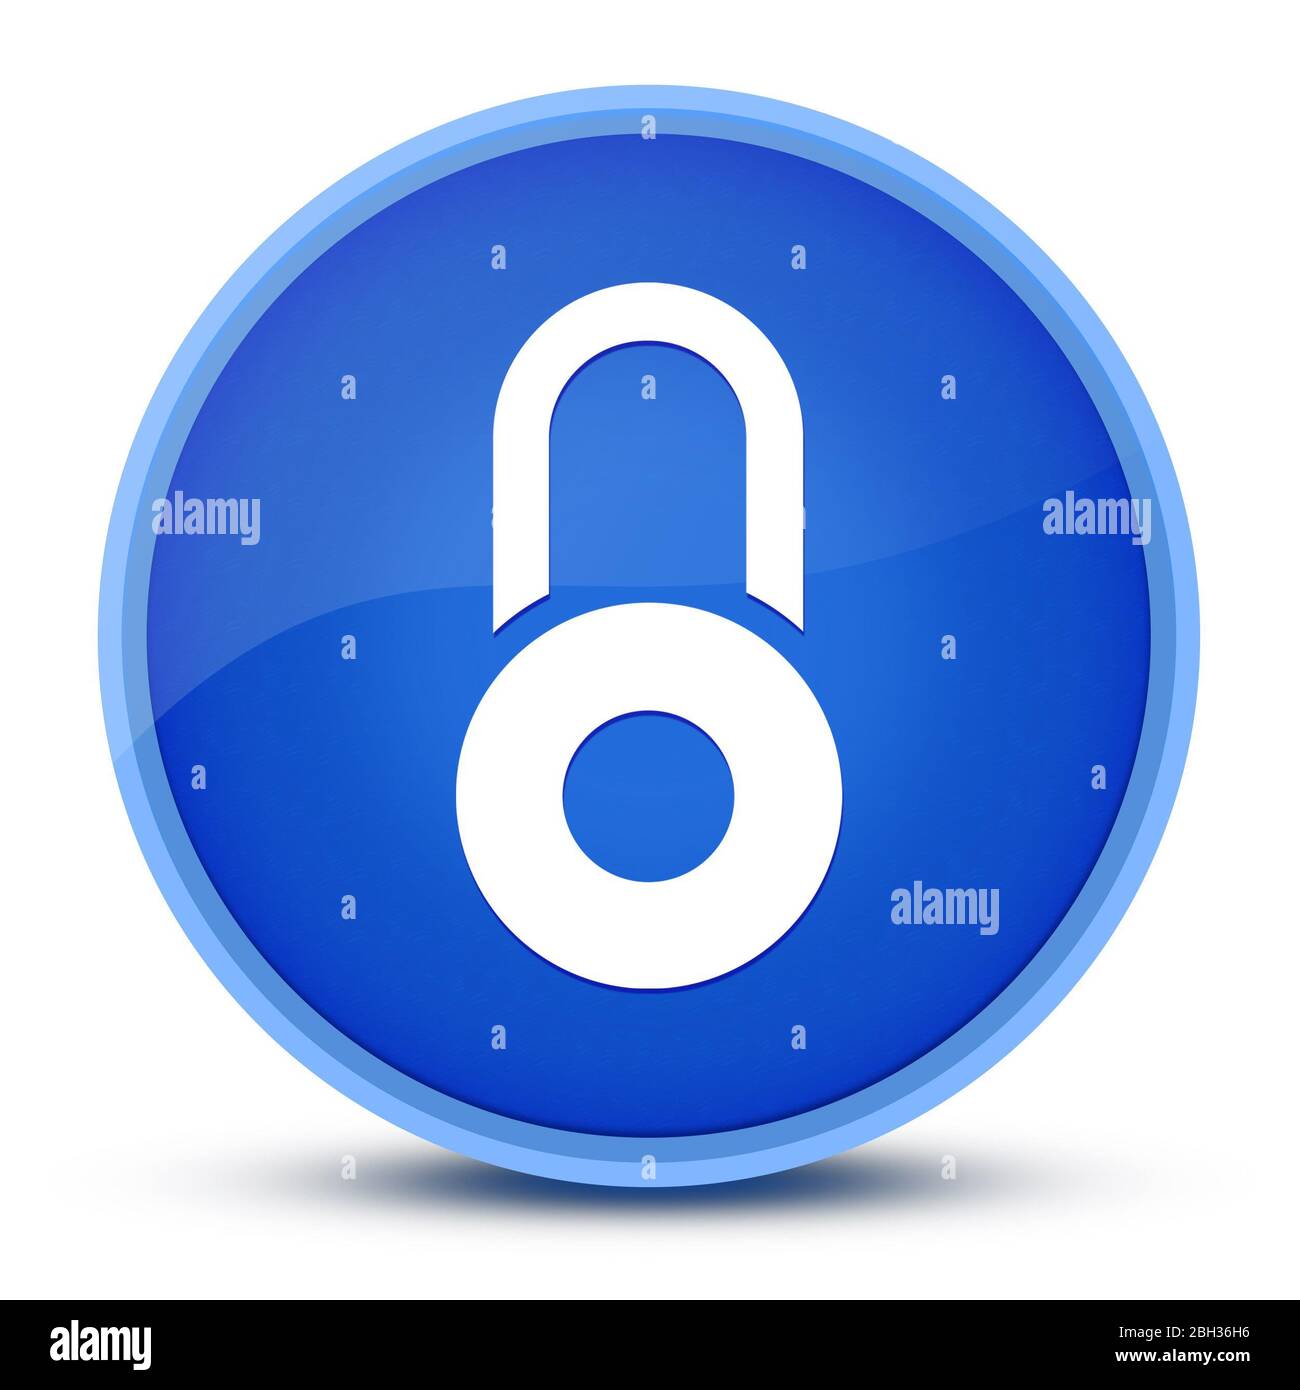 Lock icon isolated on special blue round button abstract illustration Stock Photo